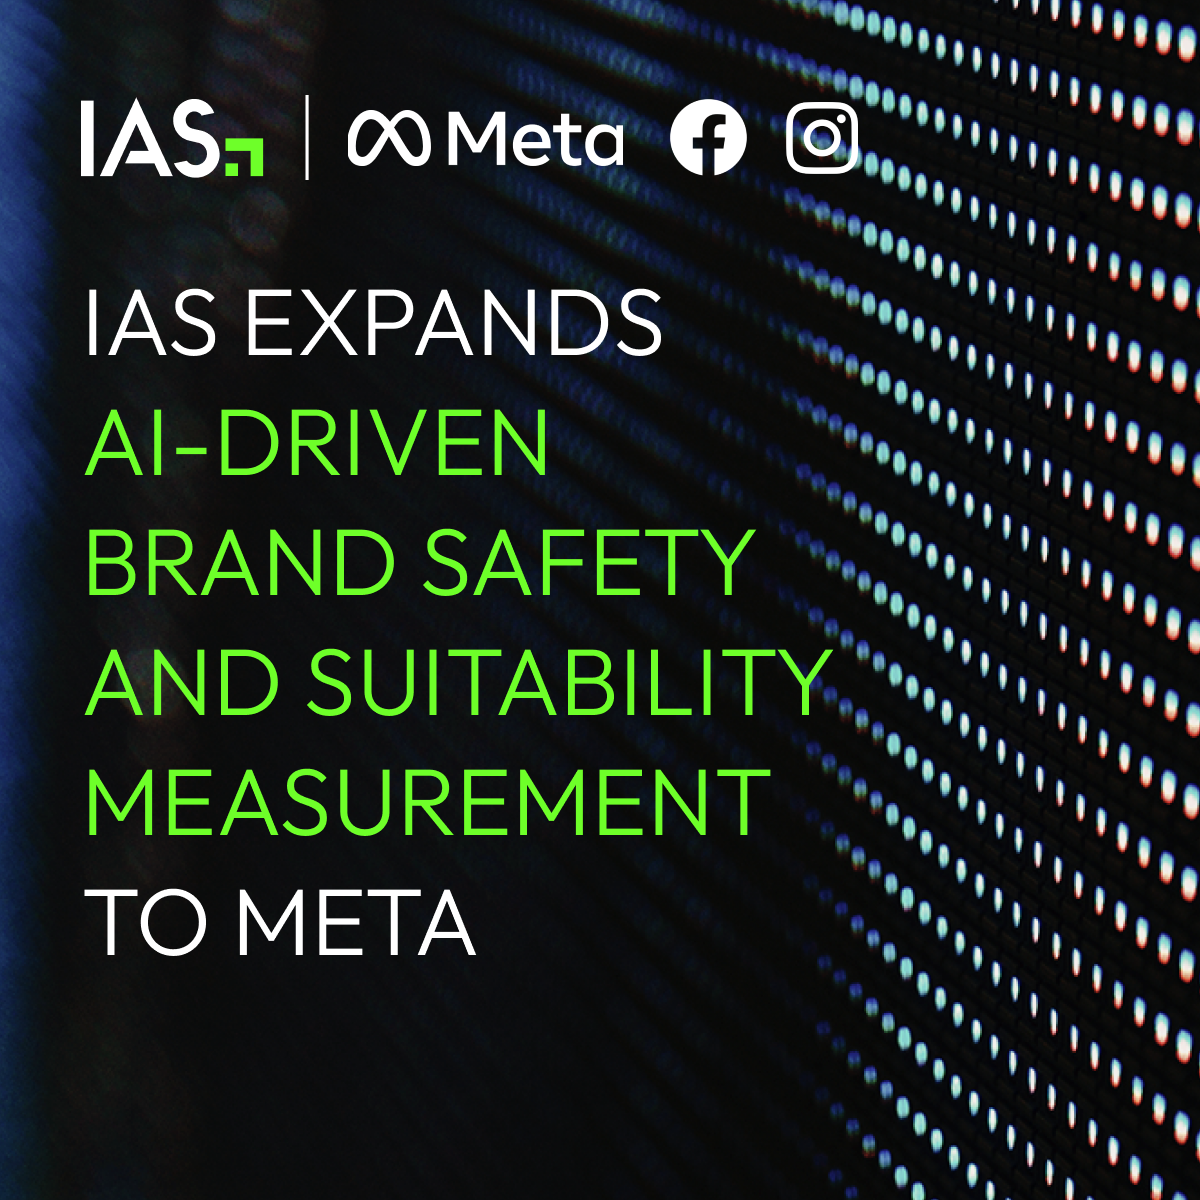 IAS Brand Safety & Suitability Measurement is Now Available Across Meta Platforms